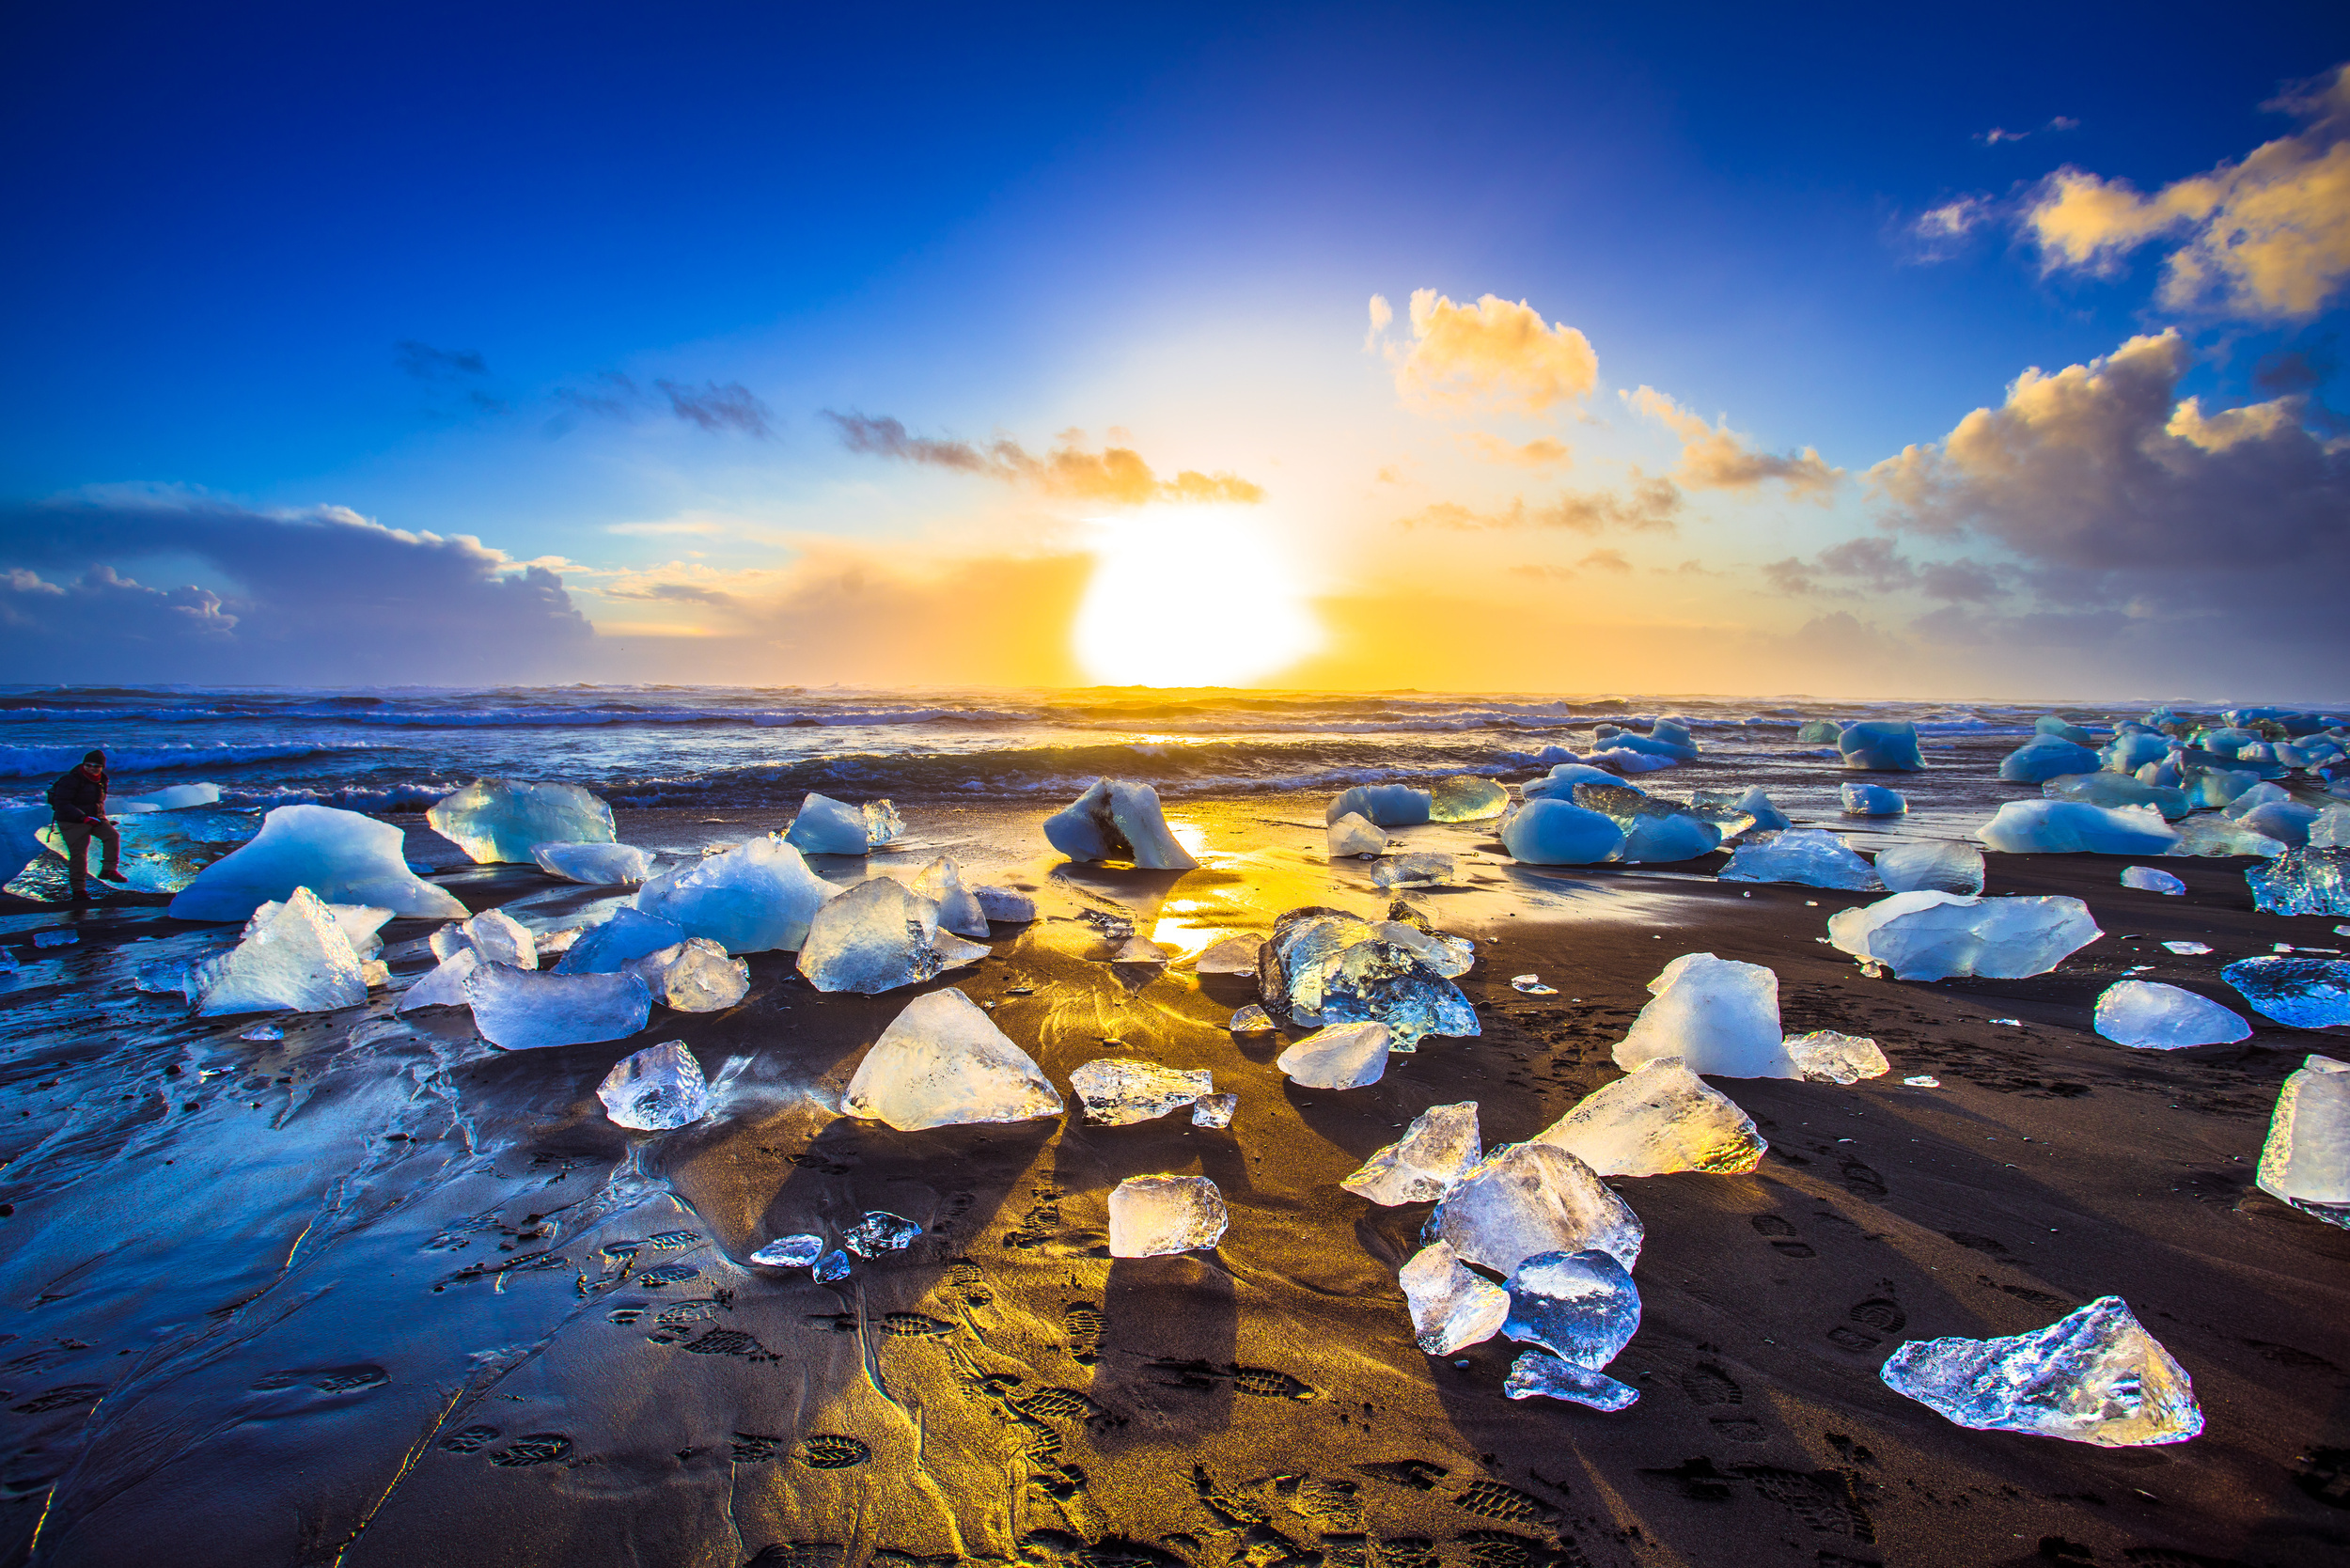 <p>Another unlikely place to hit up for a beach trip, Iceland is actually home to some spectacular ones. However, a road trip along the south coast of the country will reveal stunning black sand beaches akin to those in New Zealand or Hawaii — without the tropical climate, of course!</p><p><a href='https://www.msn.com/en-us/community/channel/vid-cj9pqbr0vn9in2b6ddcd8sfgpfq6x6utp44fssrv6mc2gtybw0us'>Follow us on MSN to see more of our exclusive lifestyle content.</a></p>